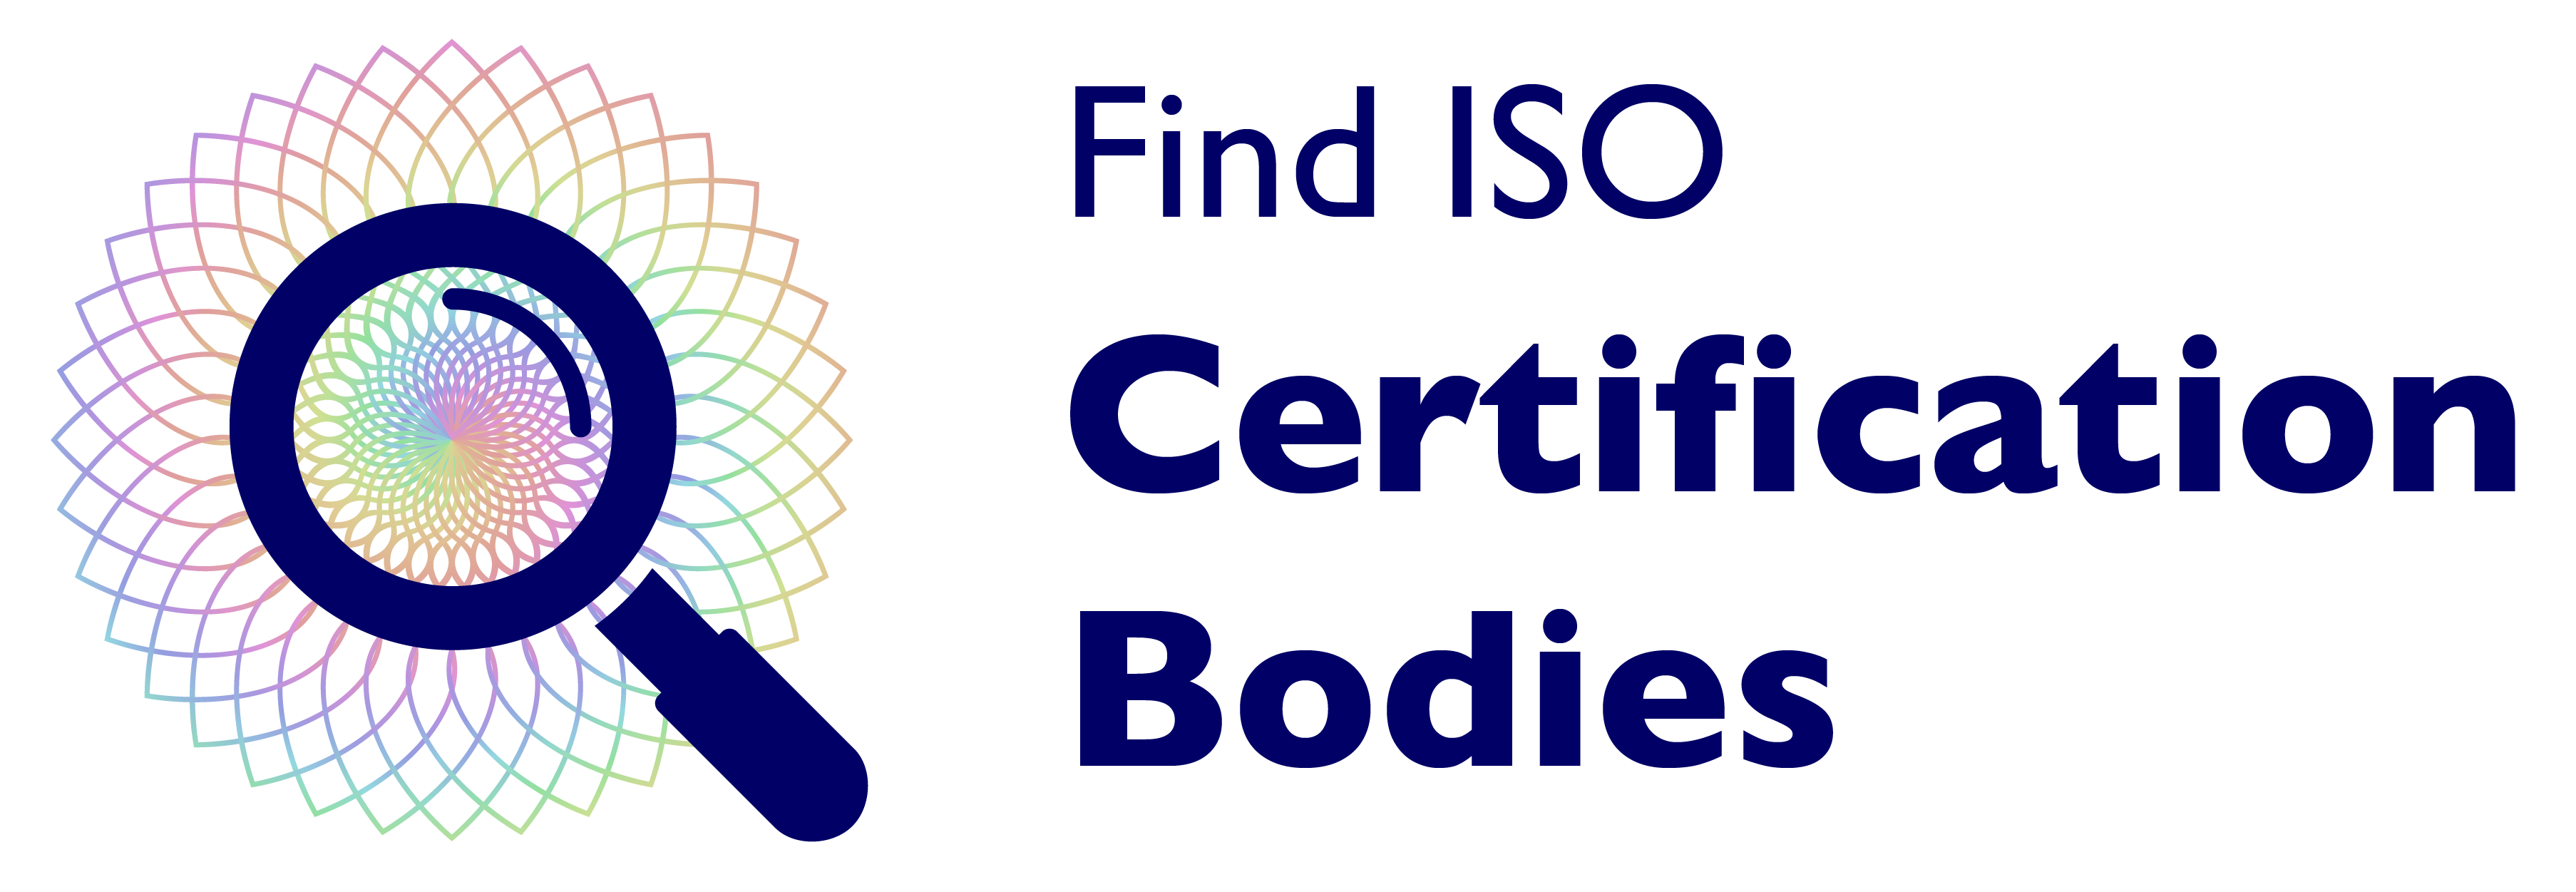 Find ISO Certification Bodies